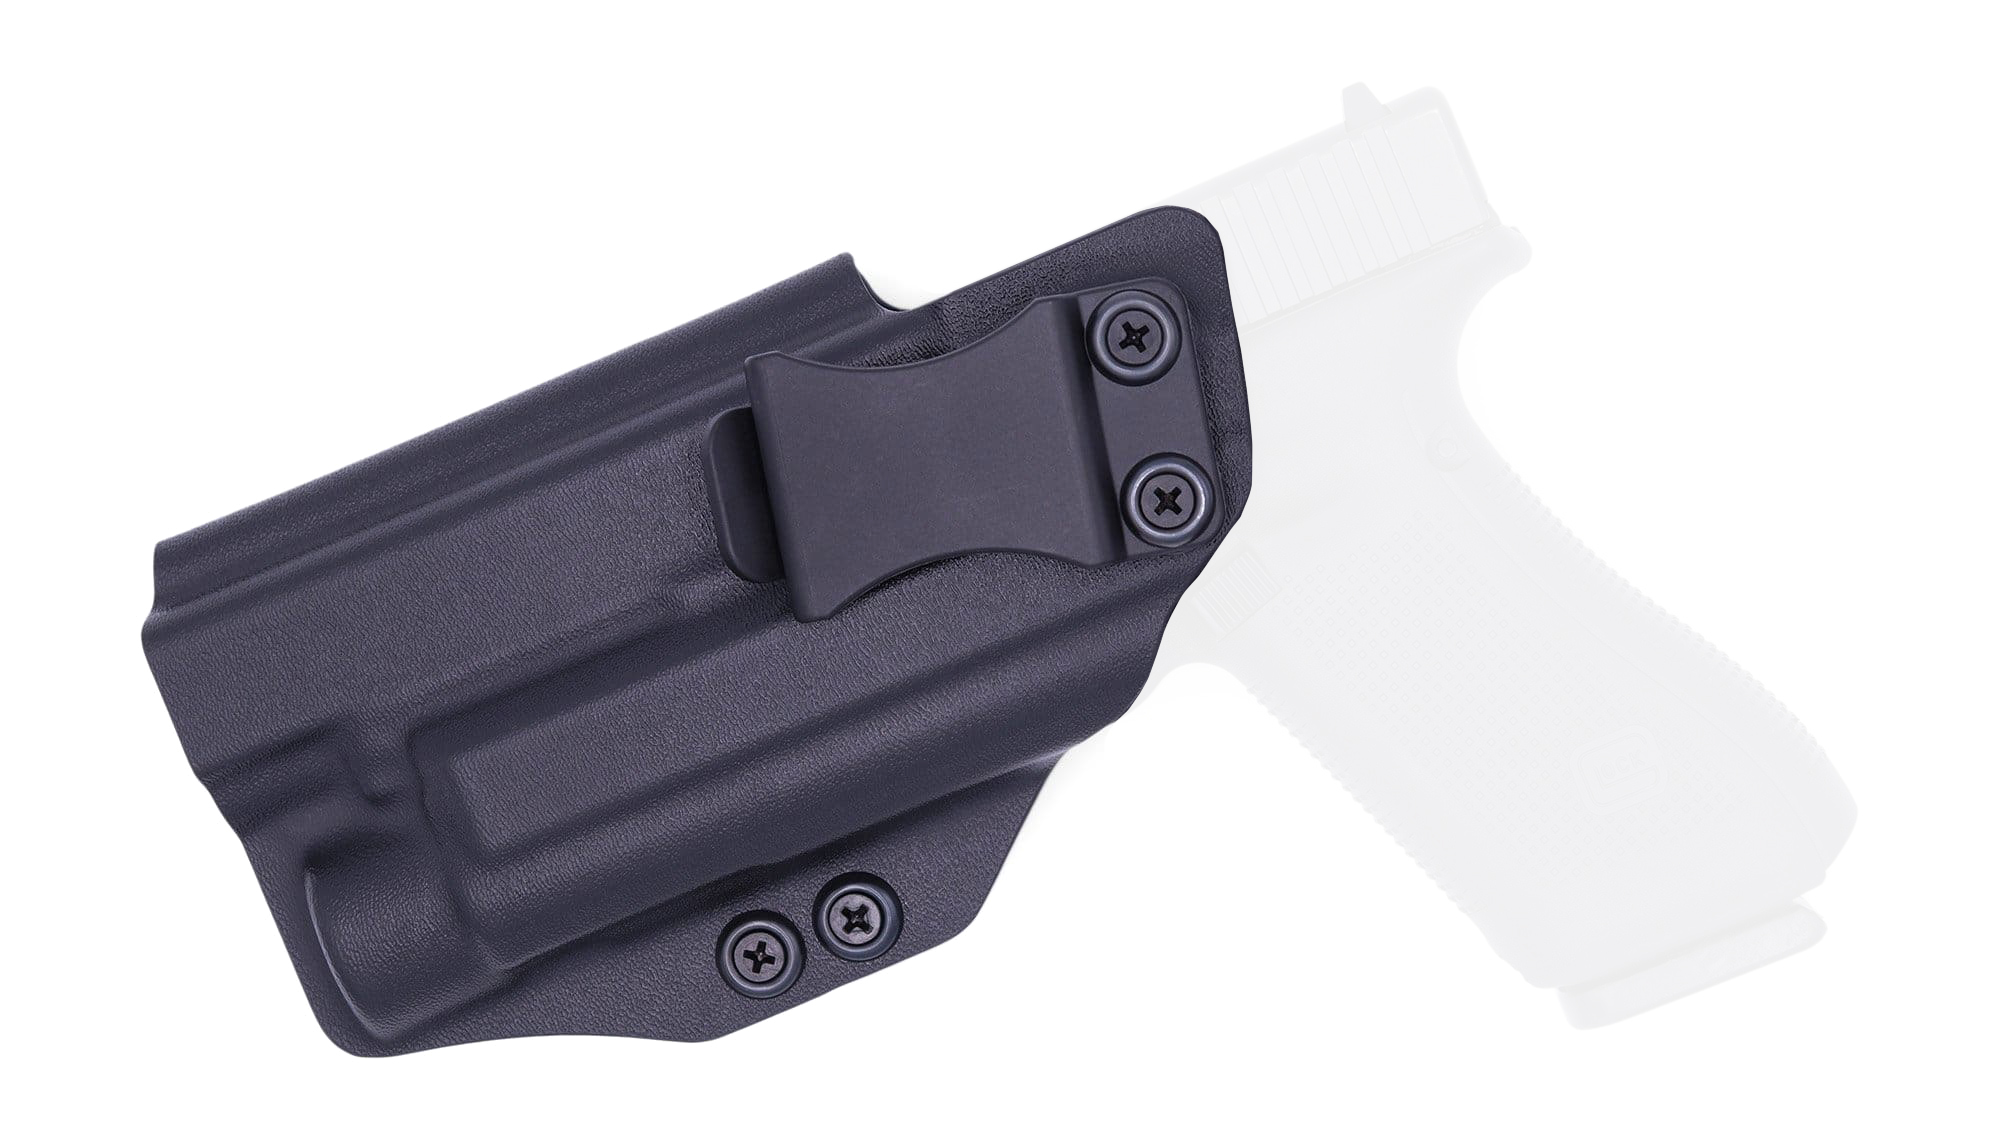 Right G1-5 Concealment Express IWB KYDEX Holster fits Glock 19/19X/23/32/45